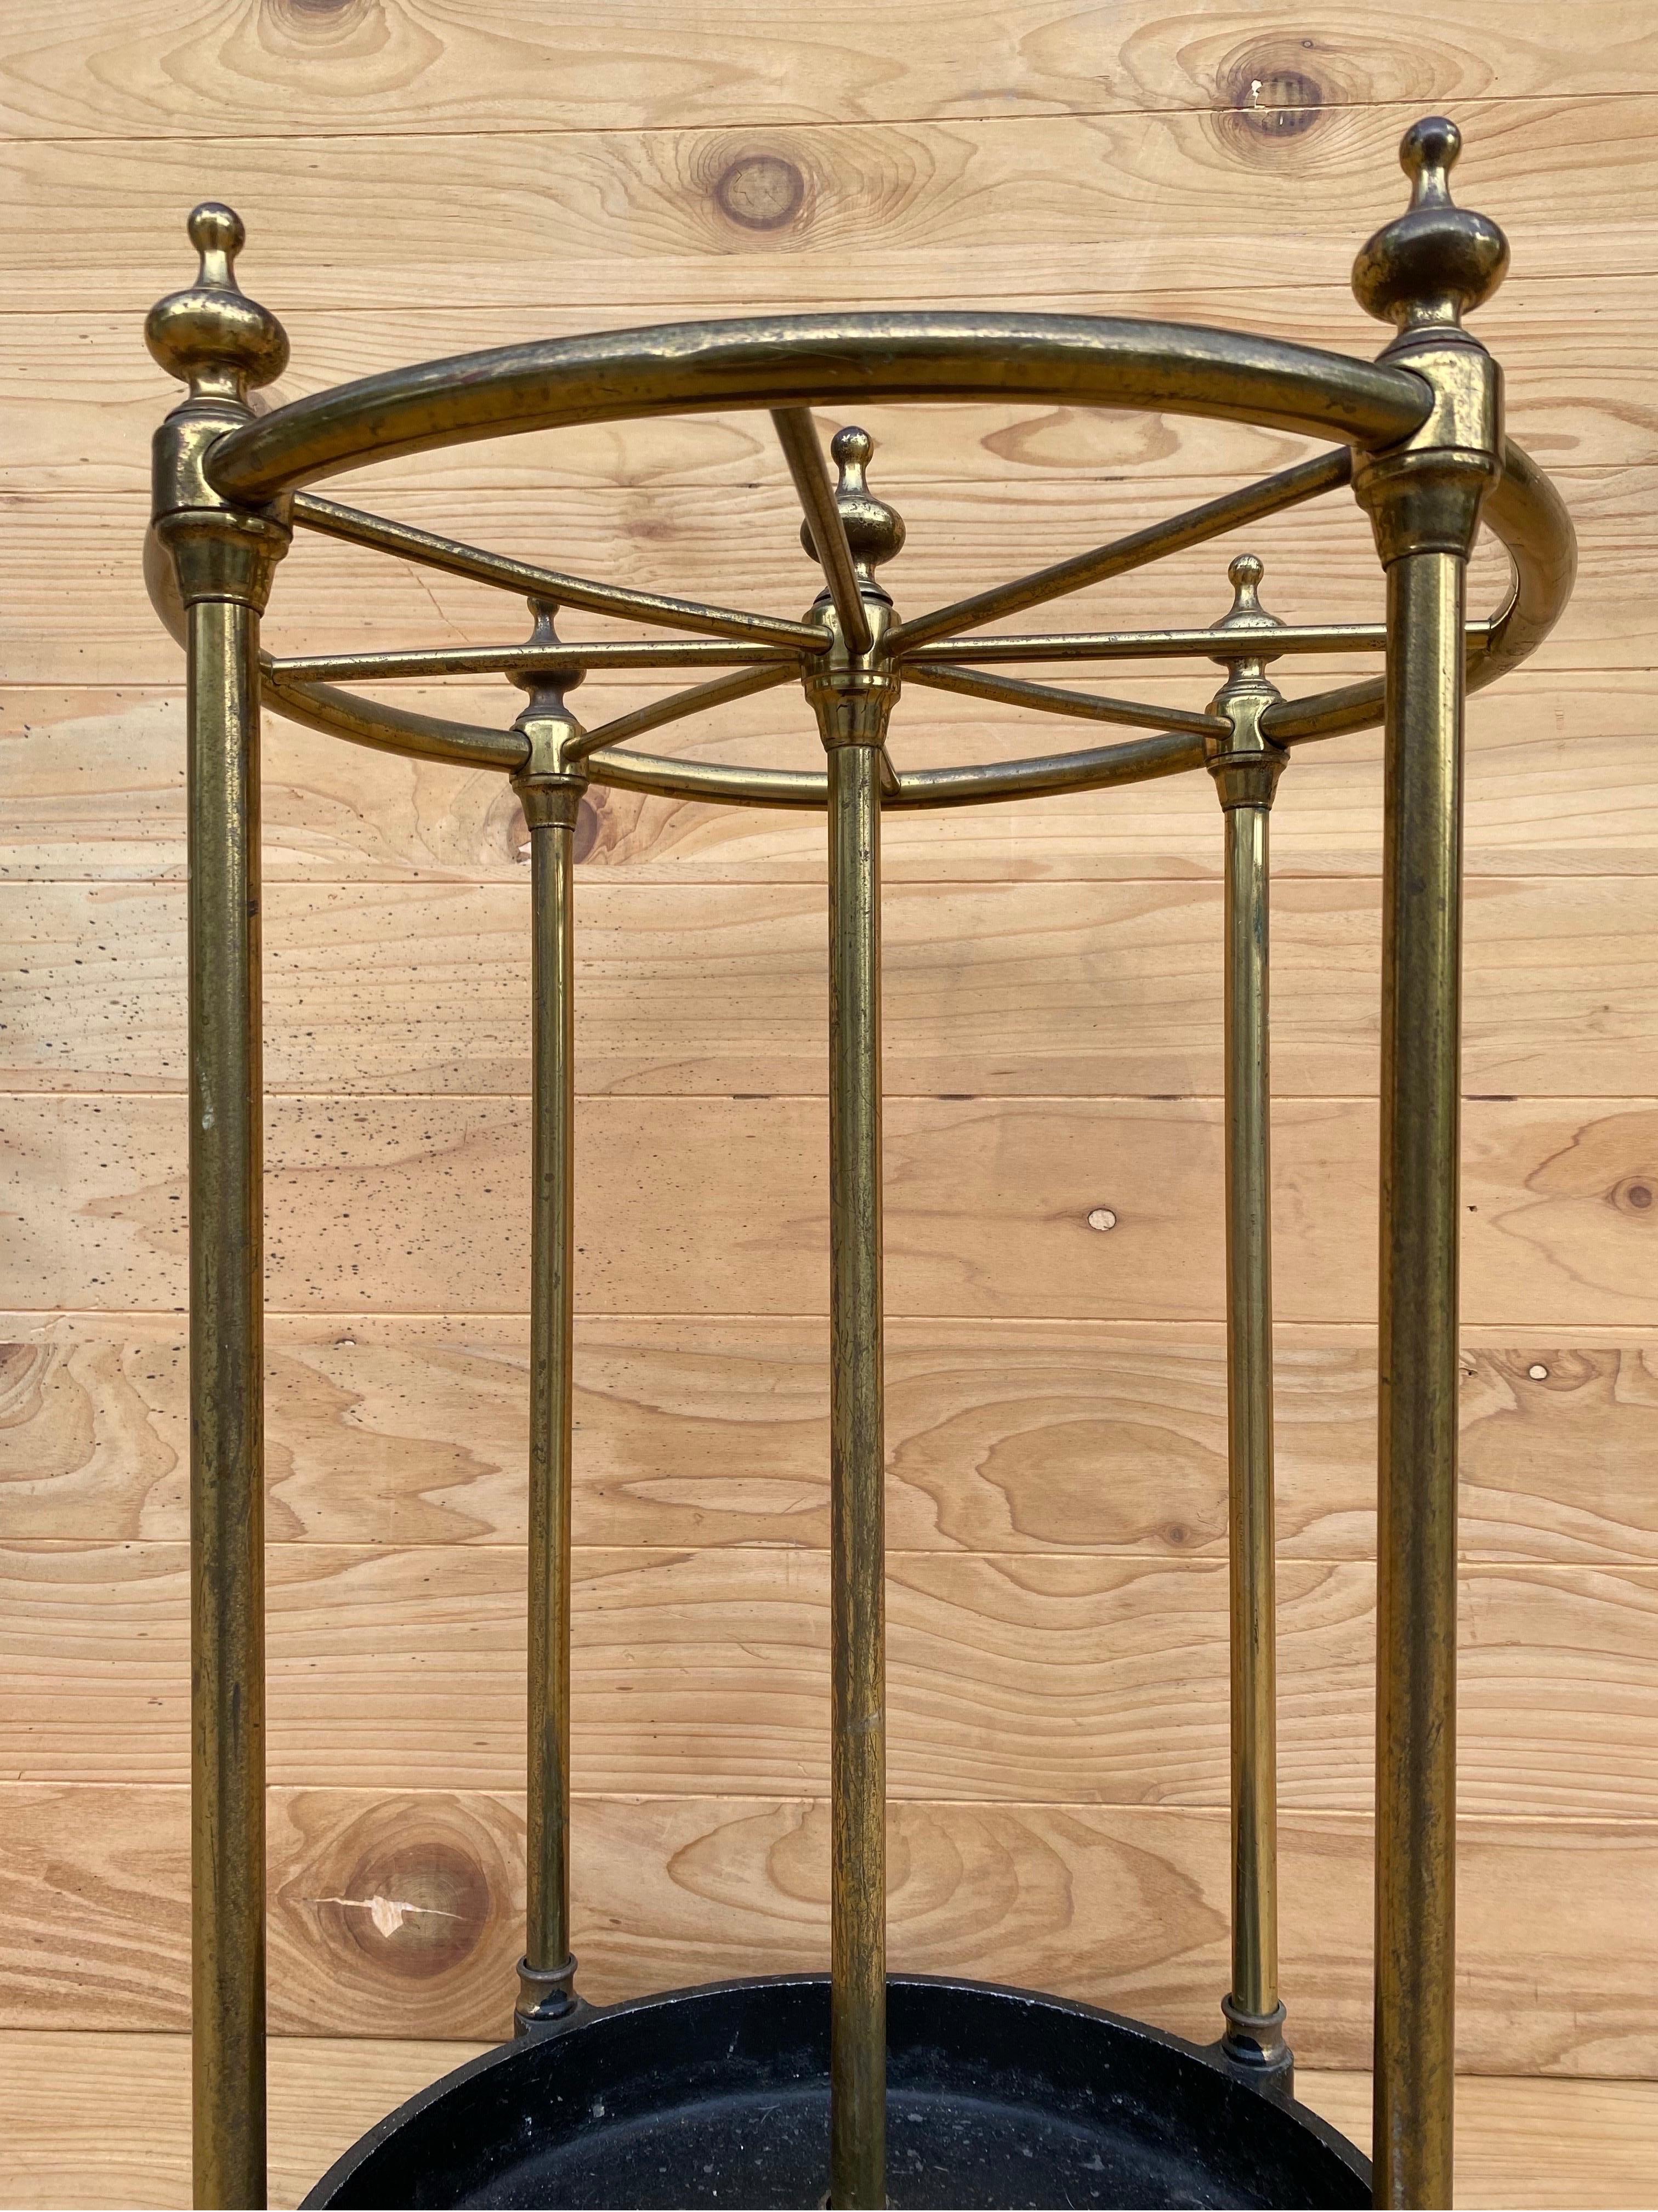 Antique English Umbrella Stand

This stand, which can hold umbrellas, canes, etc is a functional and refined piece for the entryway to your office or home. 

Circa Early 20th Century

Dimensions
H 23.75”
W 15.5”
D 15.5”